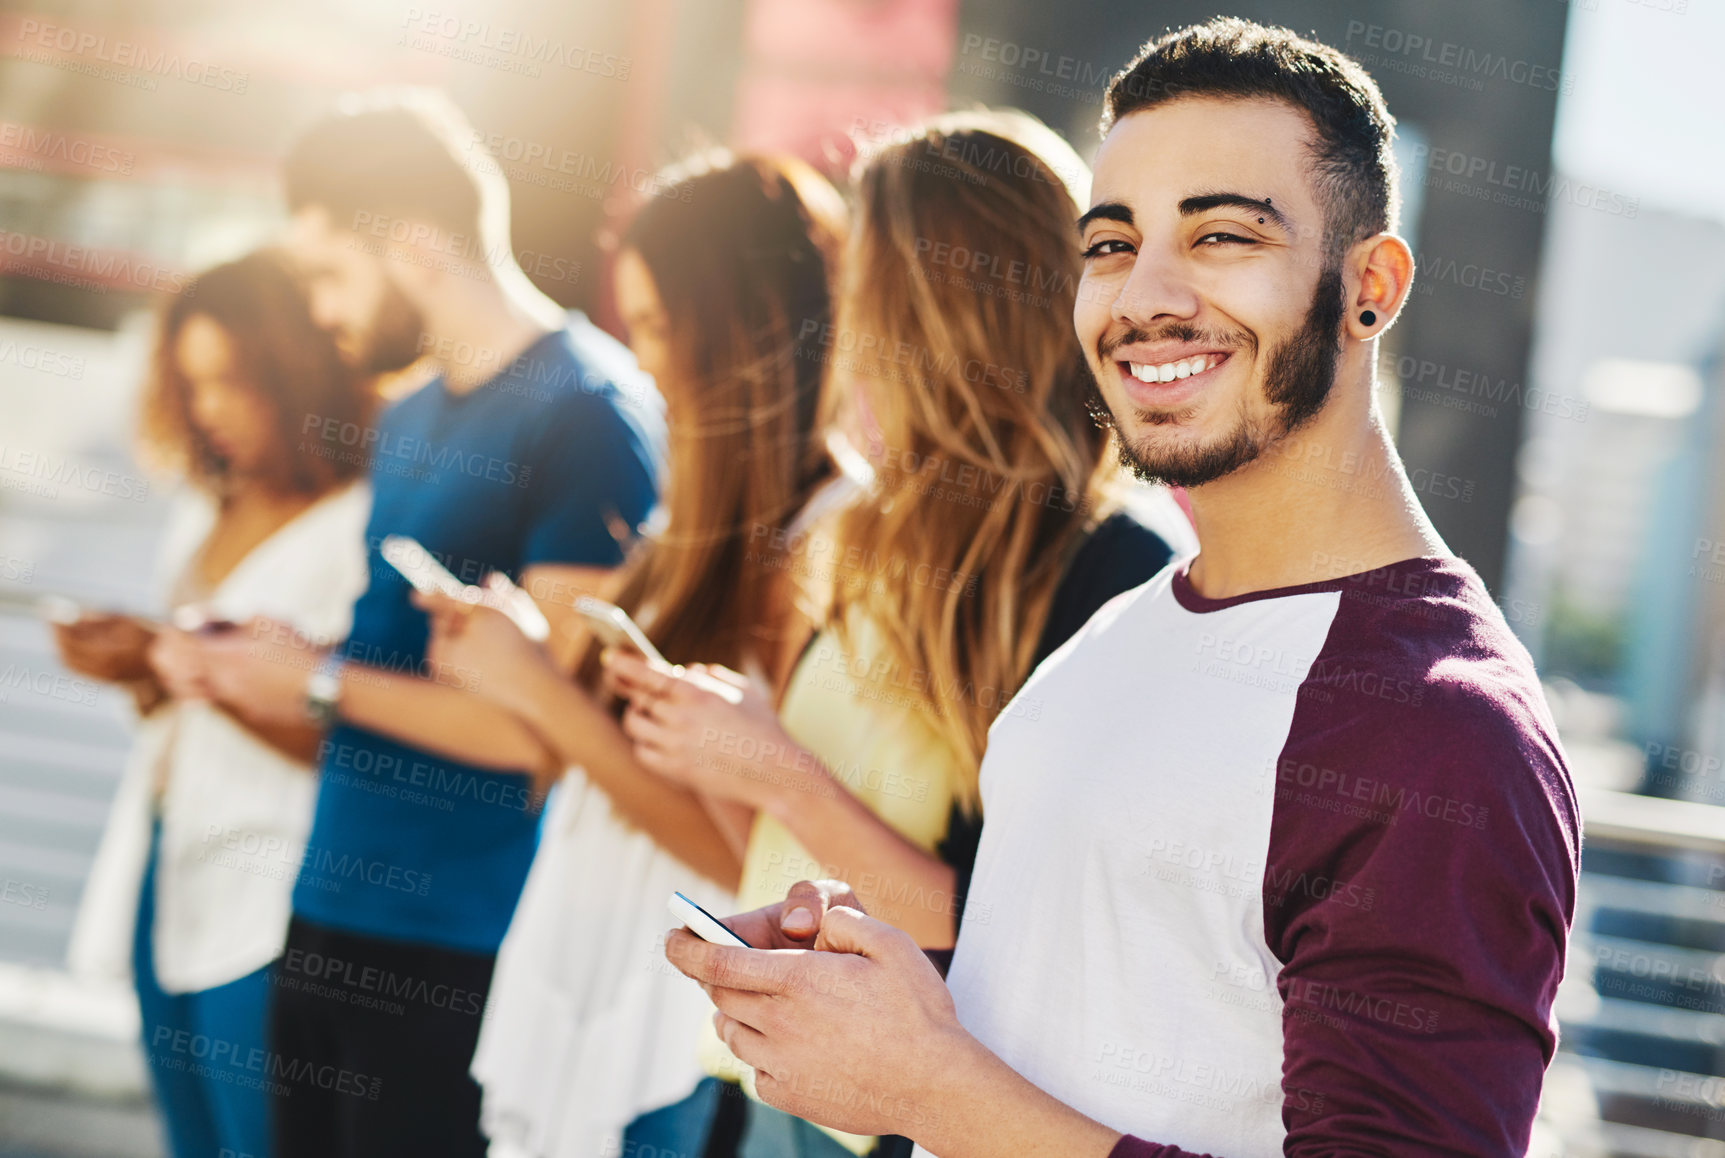 Buy stock photo Cropped portrait of a handsome young man sending a text message while standing outside with a group of friends